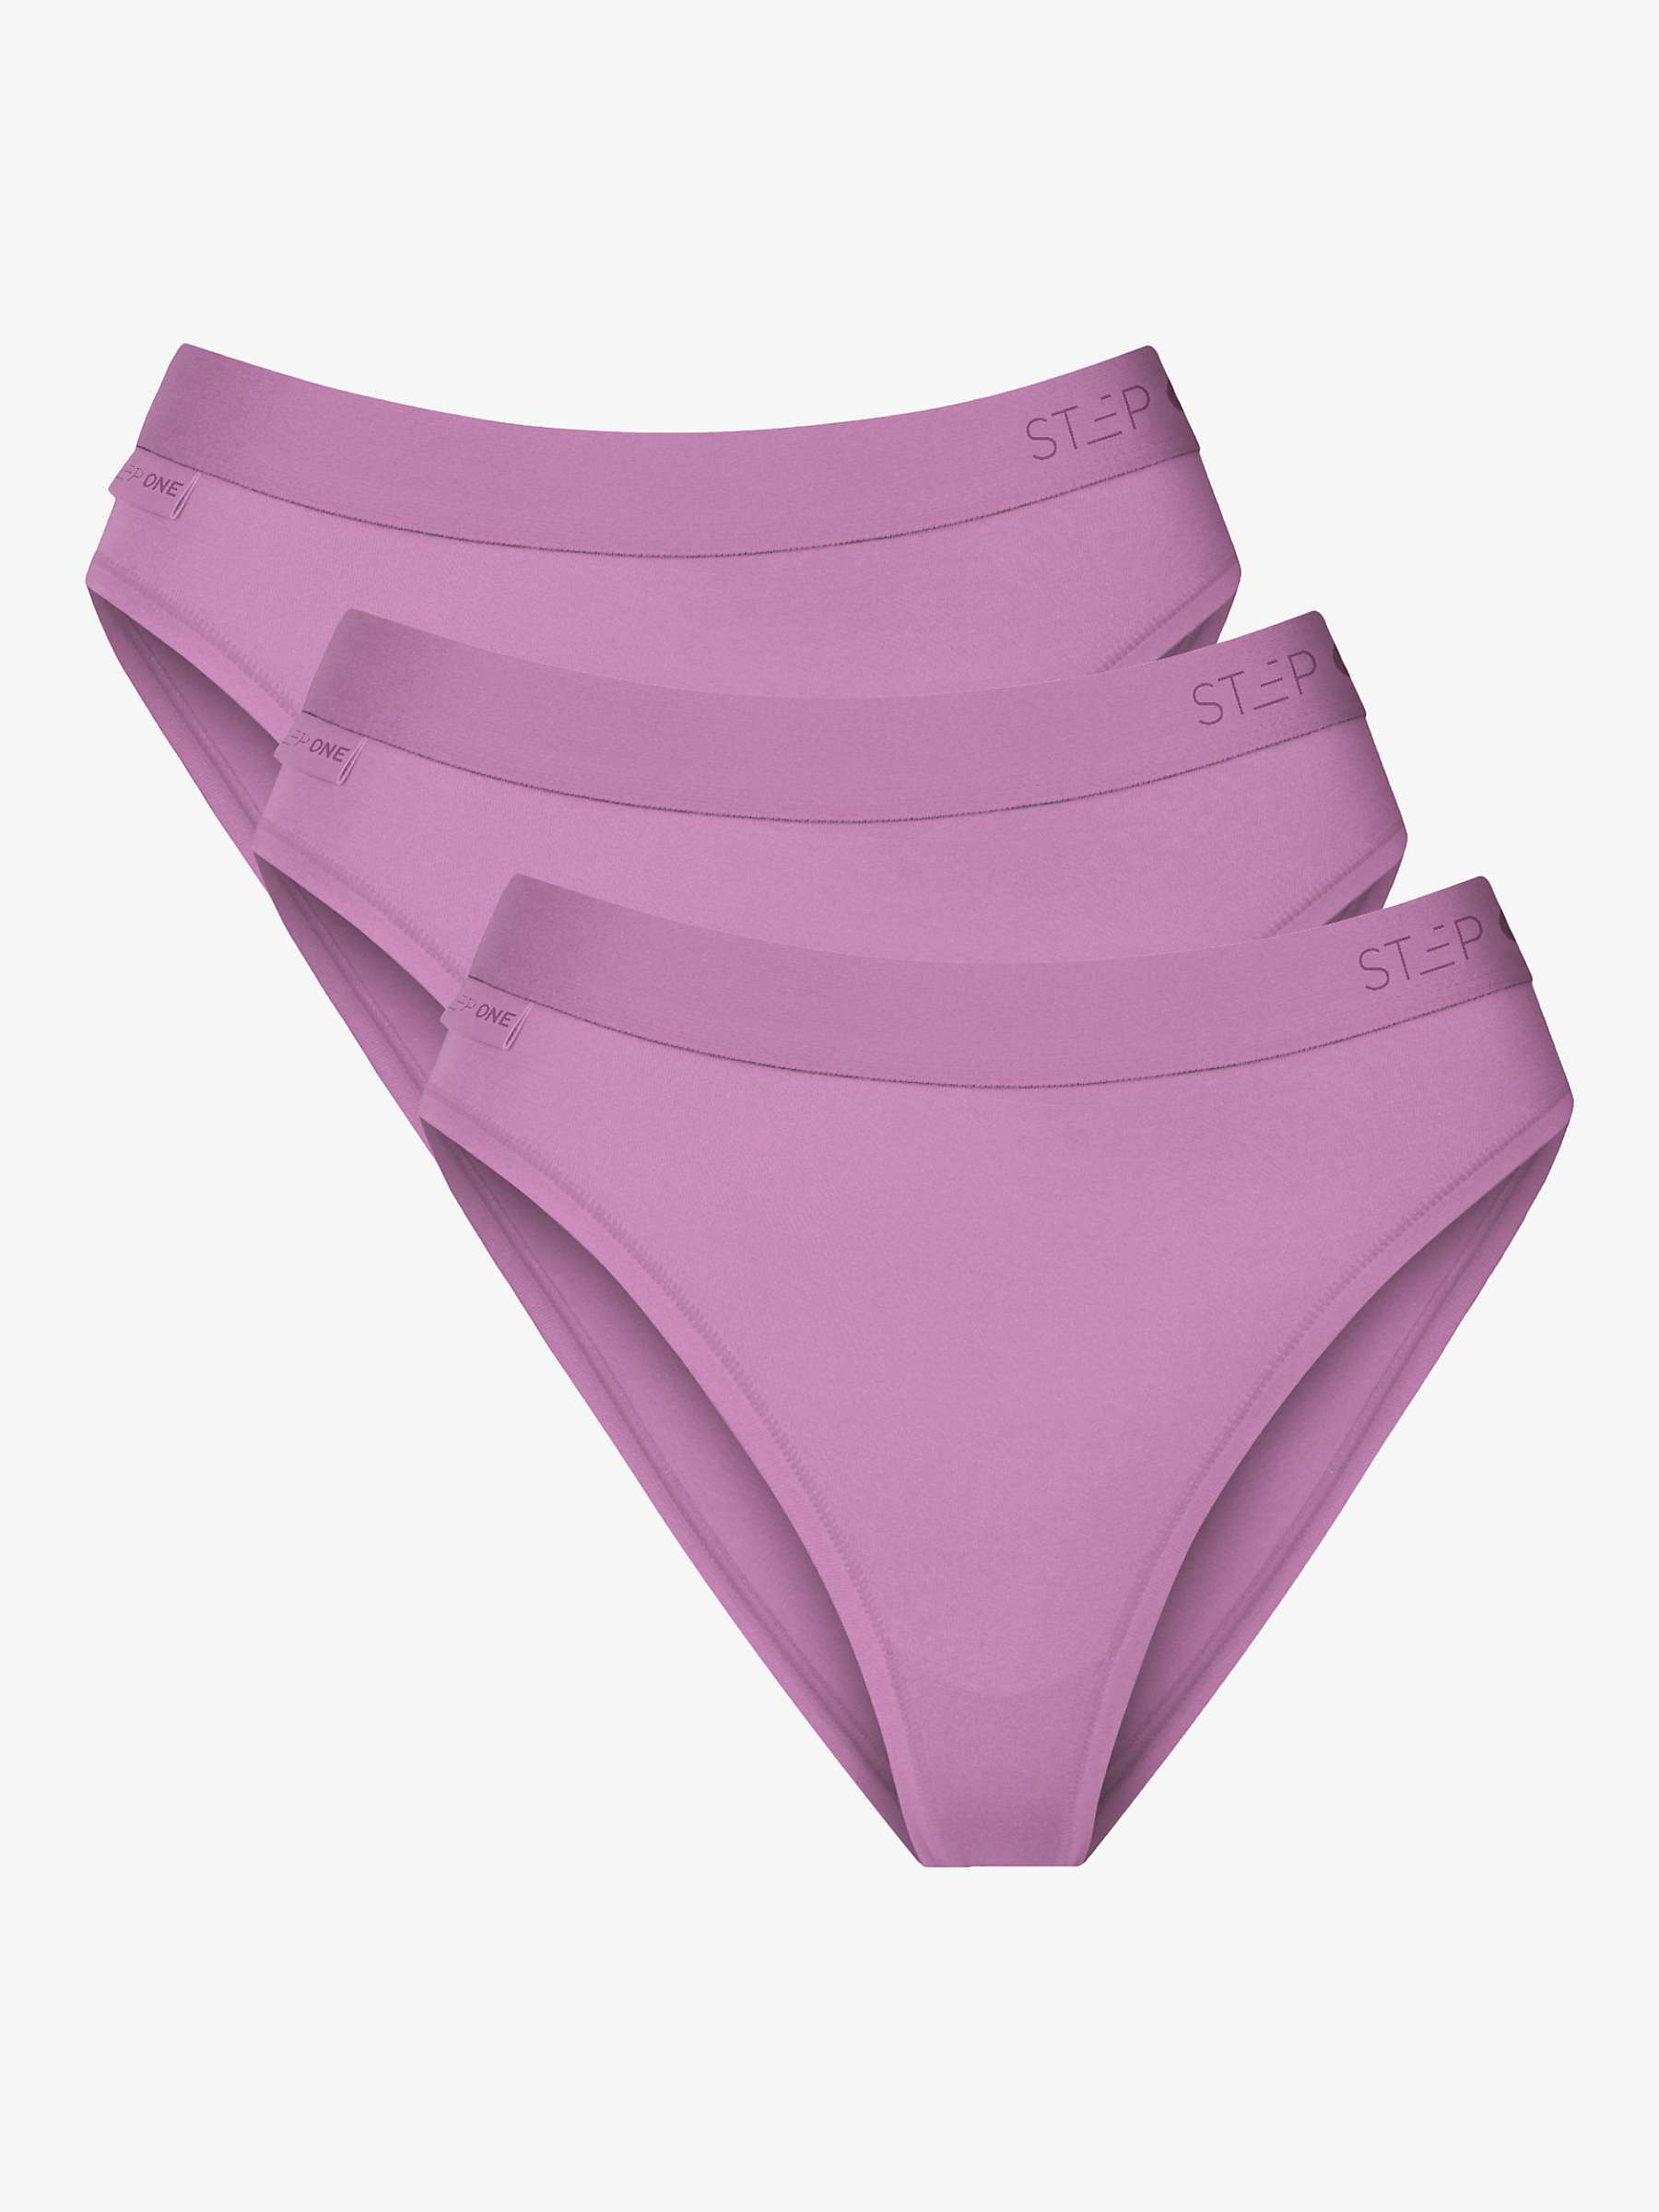 Buy Step One Bamboo Bikini Briefs, Pack of 3 Online at johnlewis.com